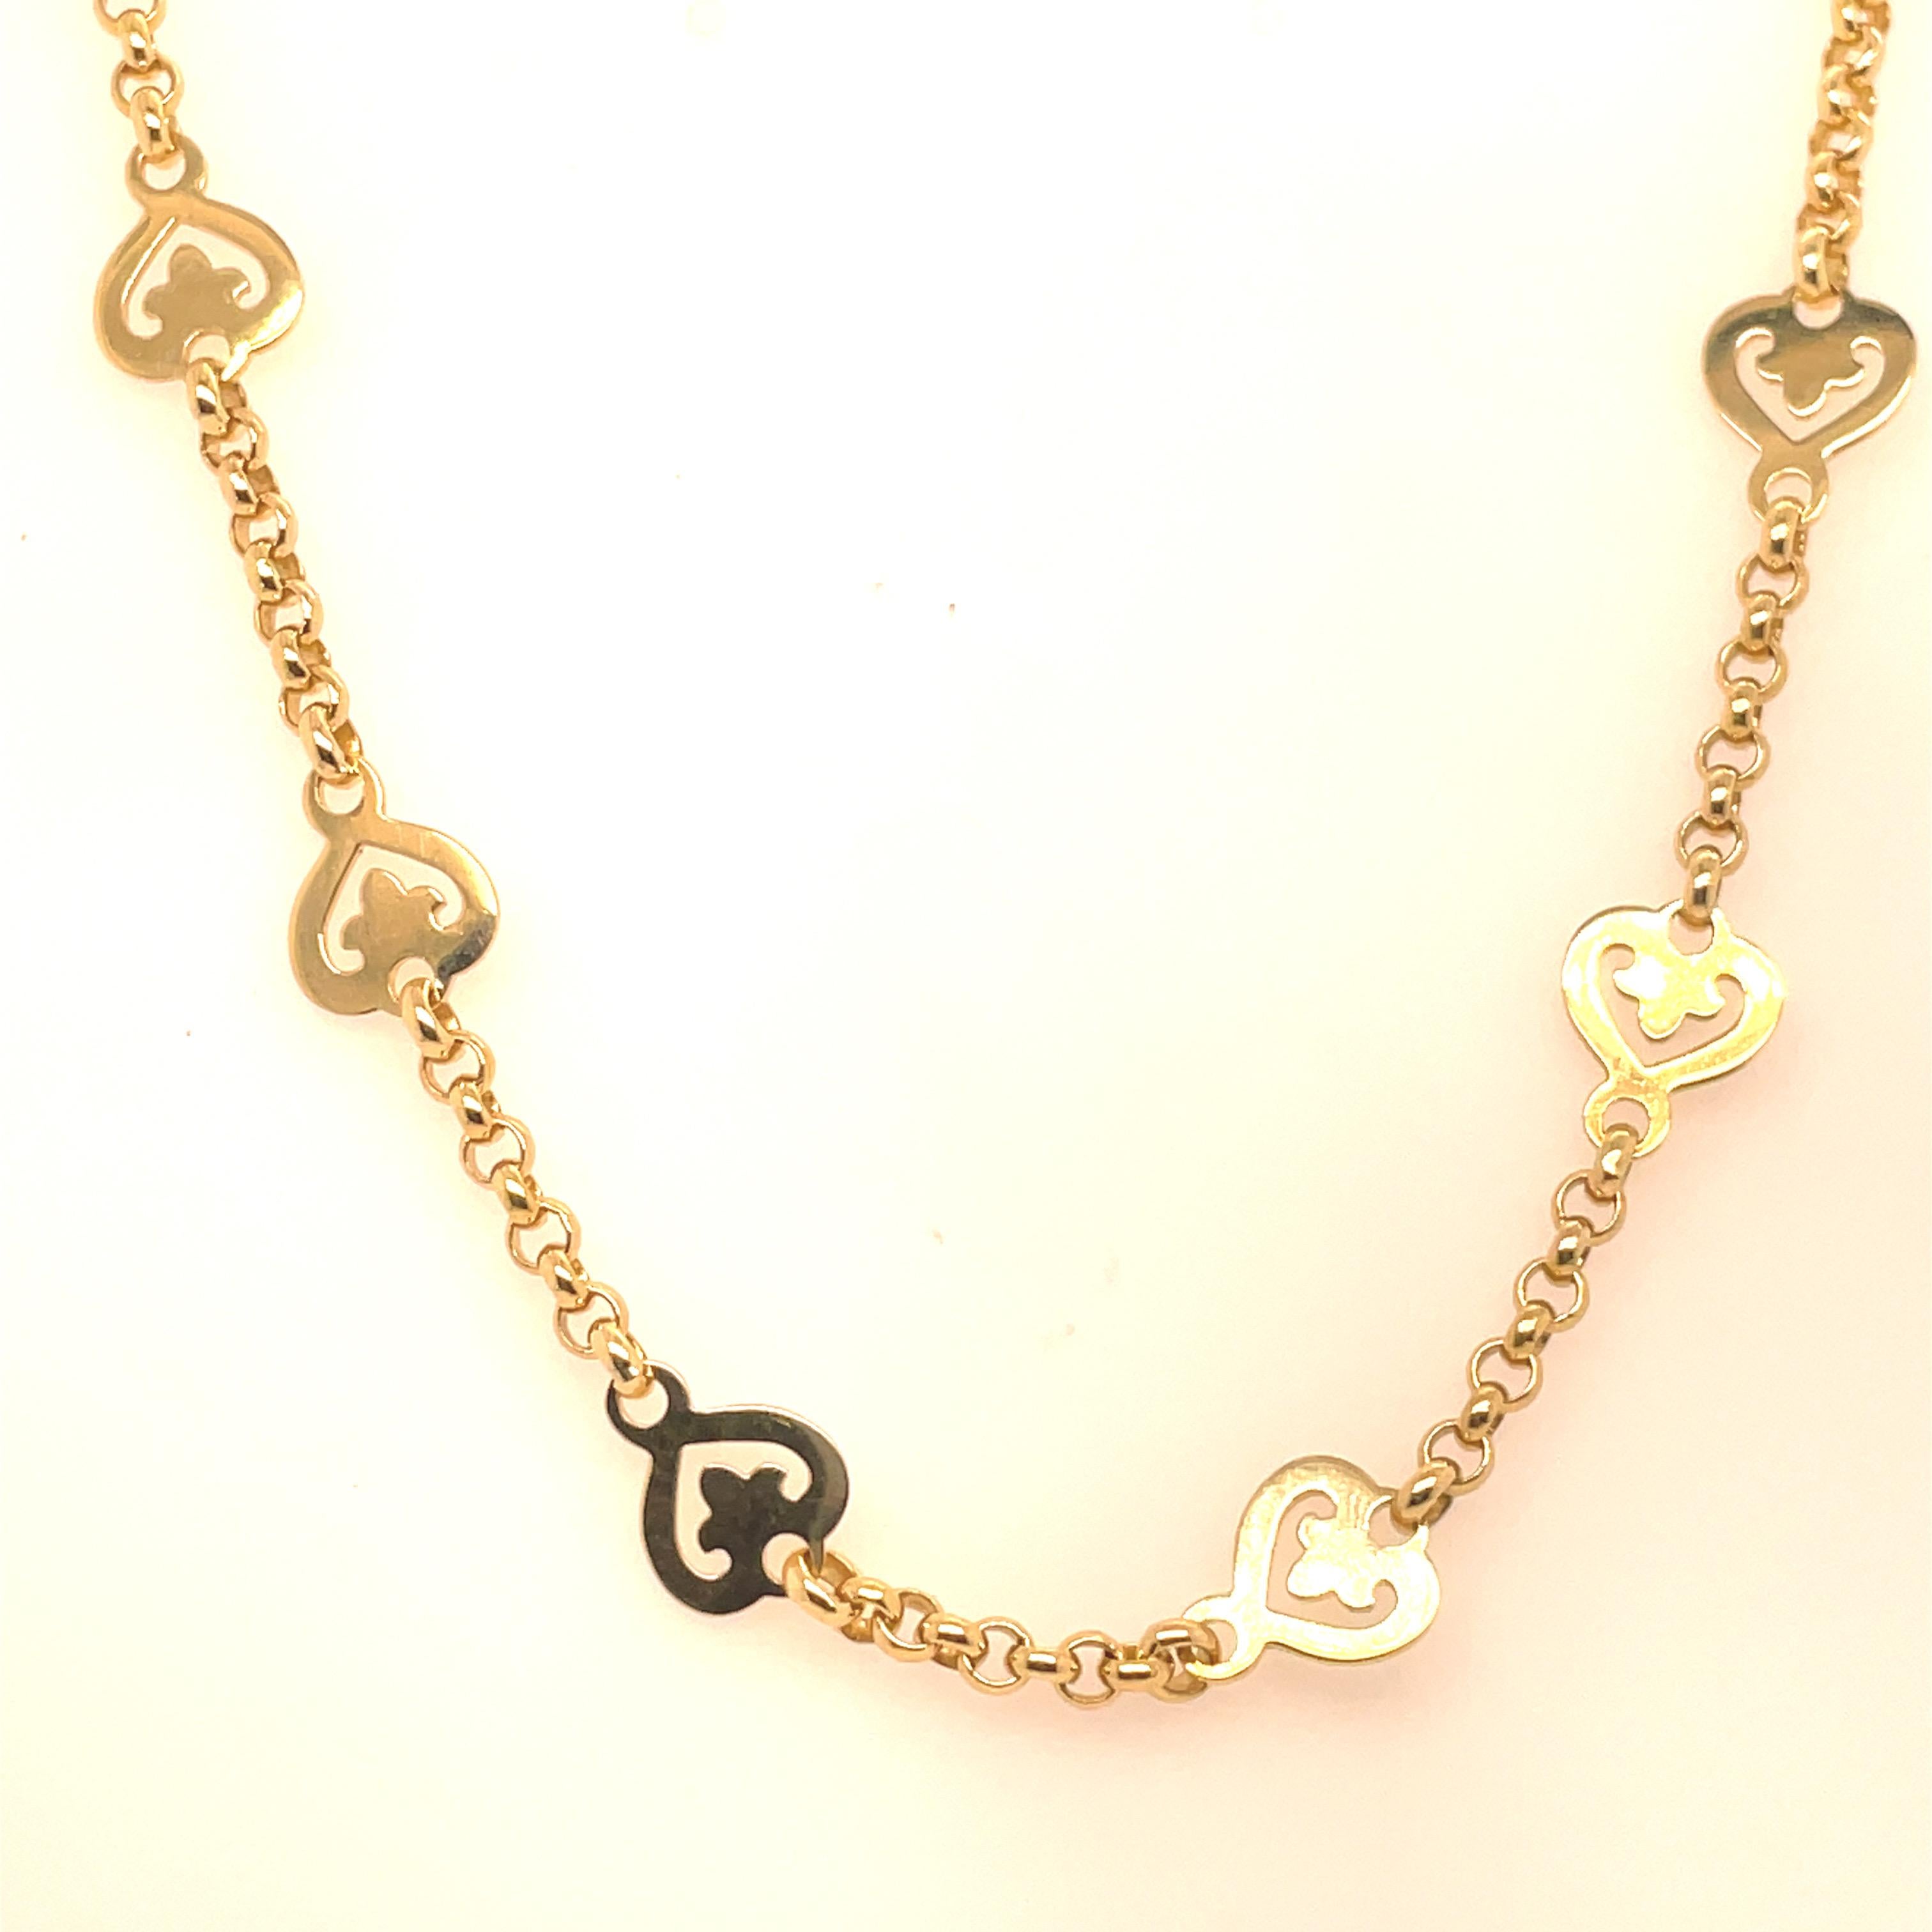 Gold Heart Link Necklace In Excellent Condition For Sale In New York, NY